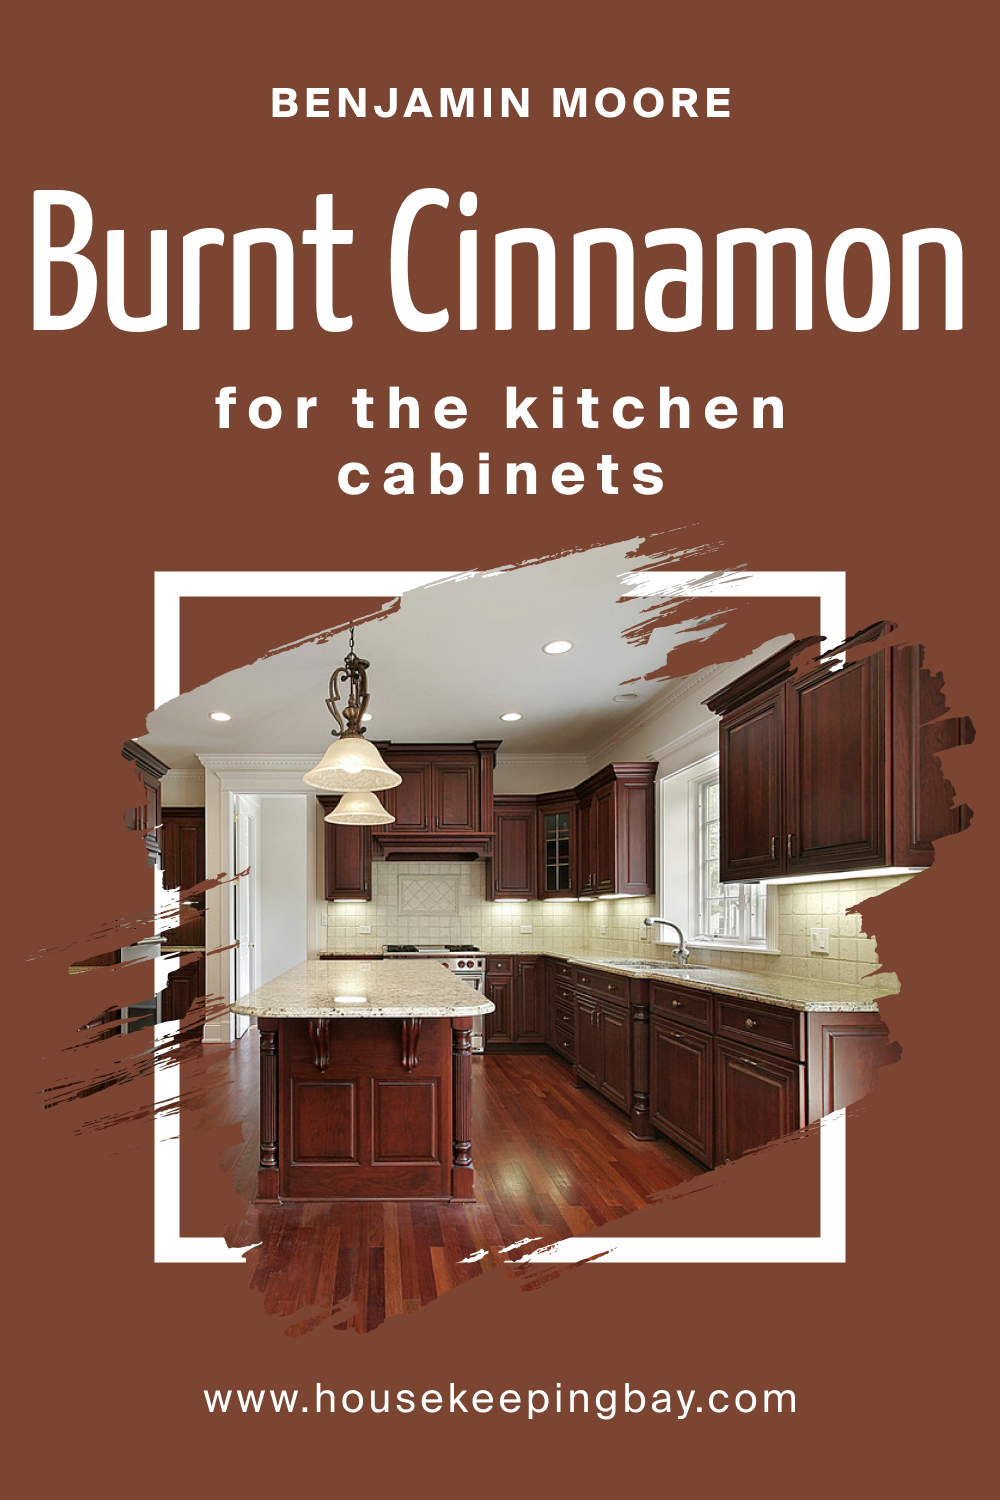 How to Use BM Burnt Cinnamon 2094-10 on the Kitchen Cabinets?